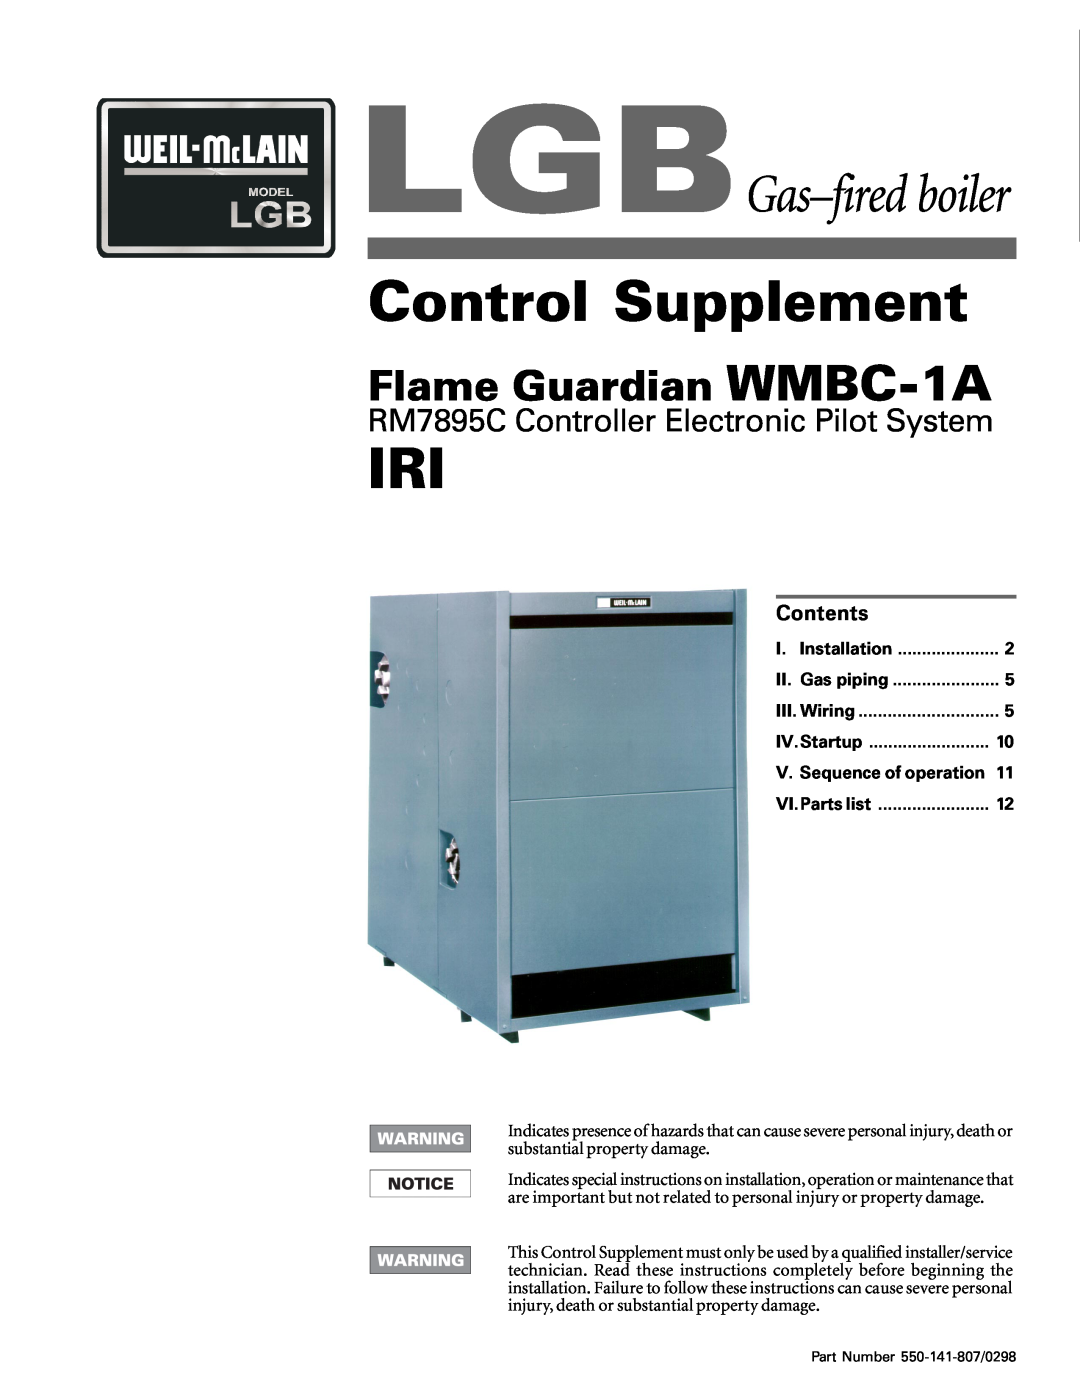 Weil-McLain WMBC-1A manual Contents, V. Sequence of operation, Control Supplement, LGBGas-firedboiler 